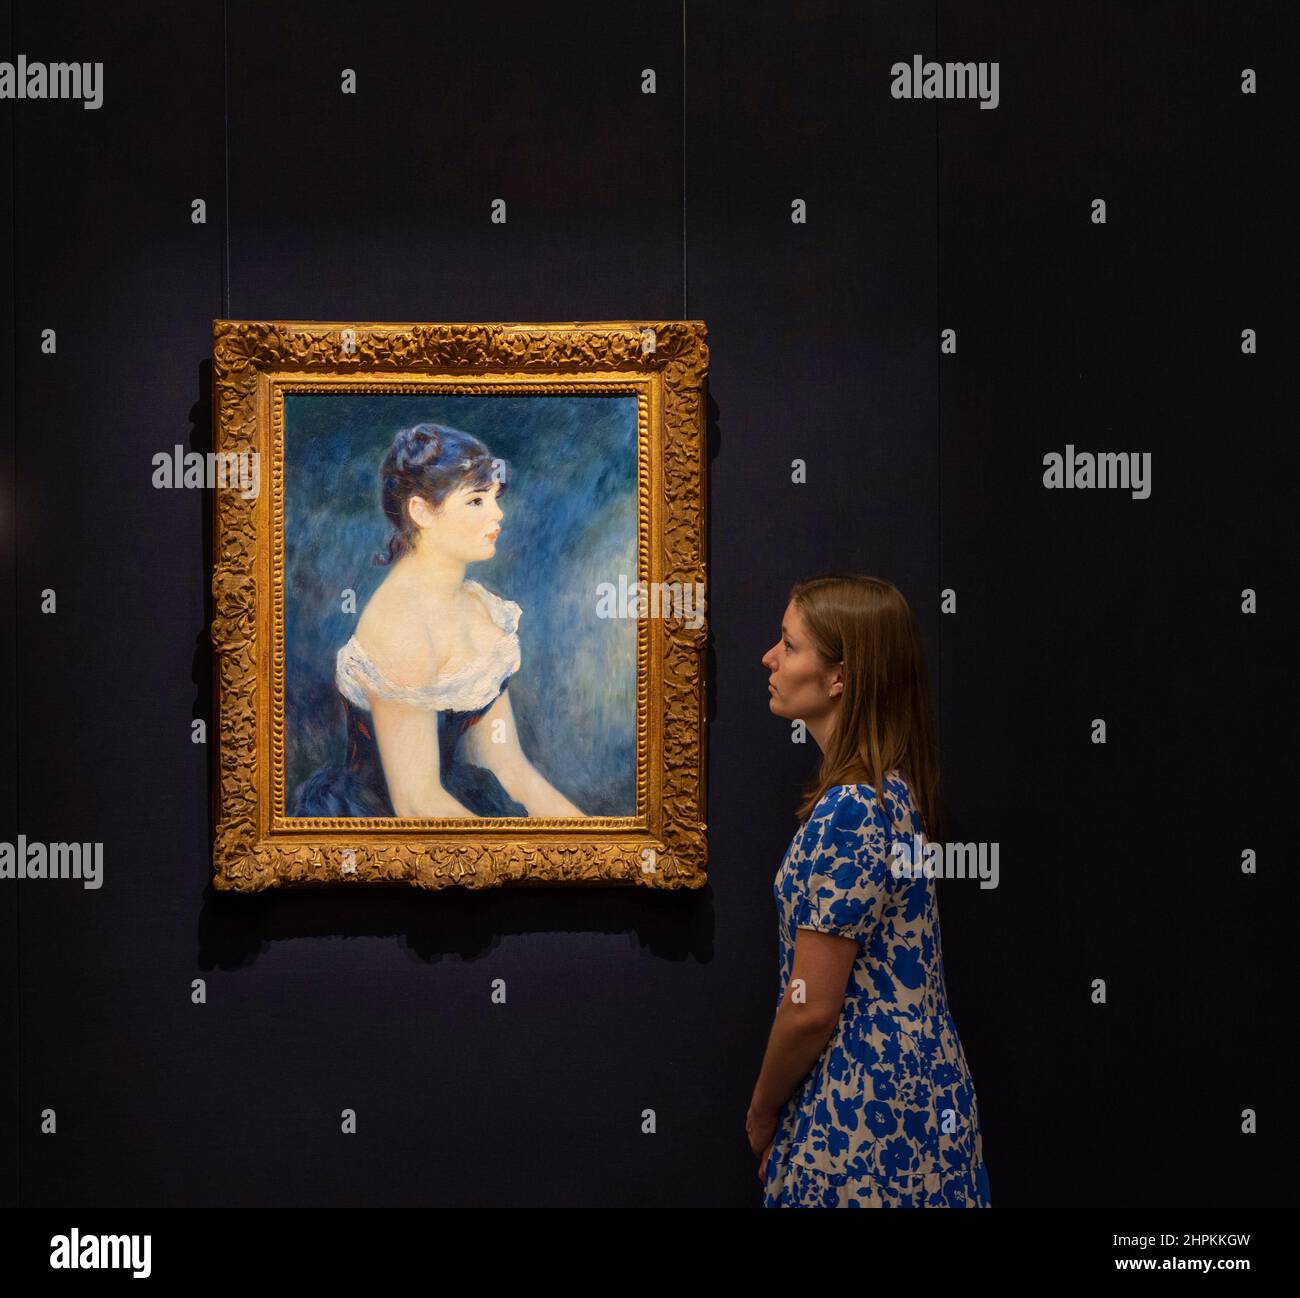 Sotheby’s, London, UK. 22 February 2022. Mastepieces by Magritte, Monet, Picasso, Hockney, van Gogh, Renoir and Banksy on display for the Modern & Contemporary Evening Auction and Now Evening Auction on 2 March in London. Image: Pierre-Auguste Renoir, Buste de femme, de profil, 1884. Estimate: £6,000,000-8,000,000. Credit: Malcolm Park/Alamy live News Stock Photo